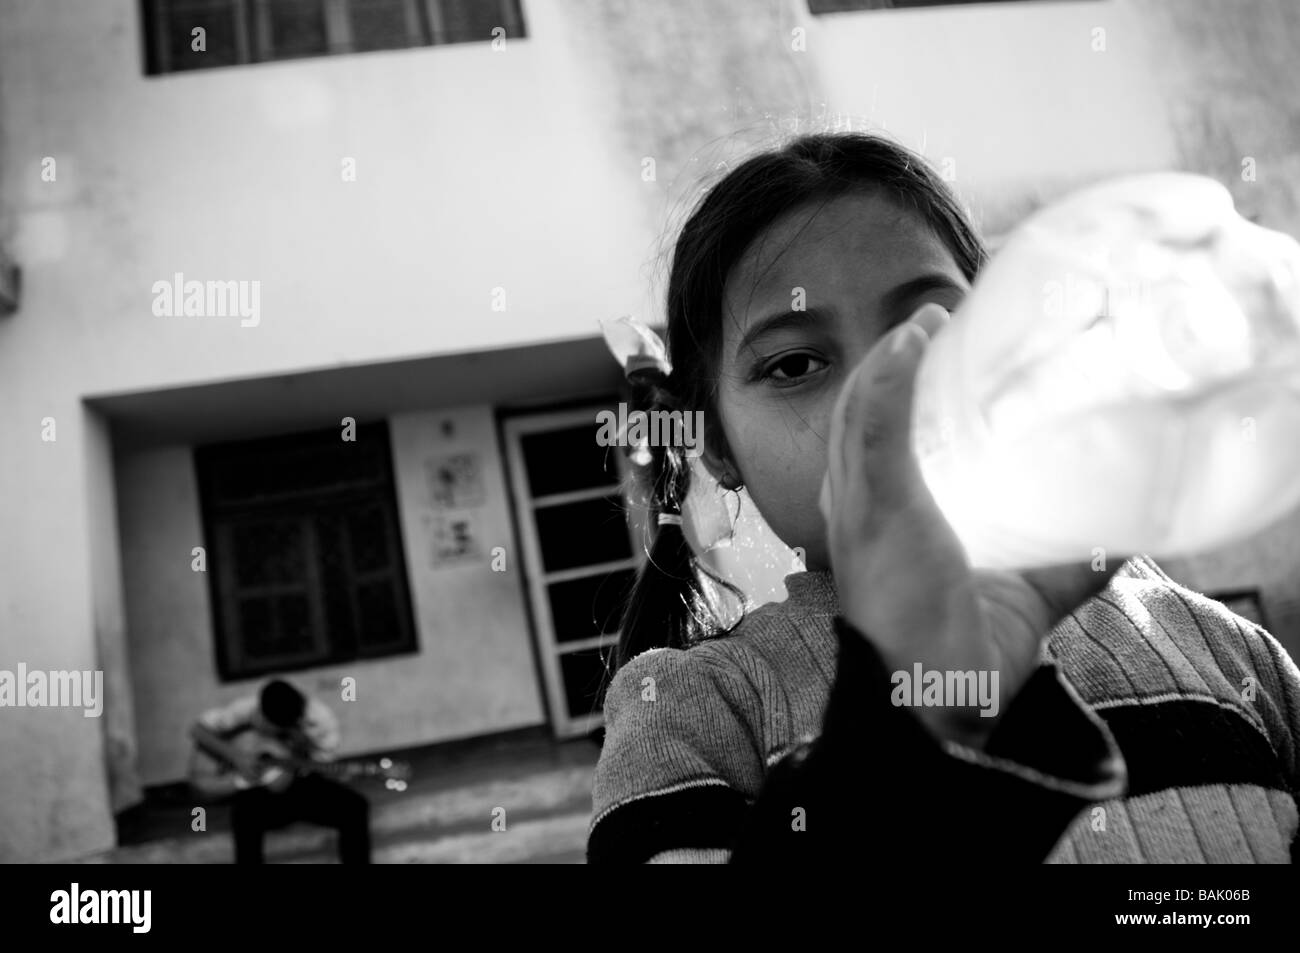 girl drinking from a water bottle Stock Photo